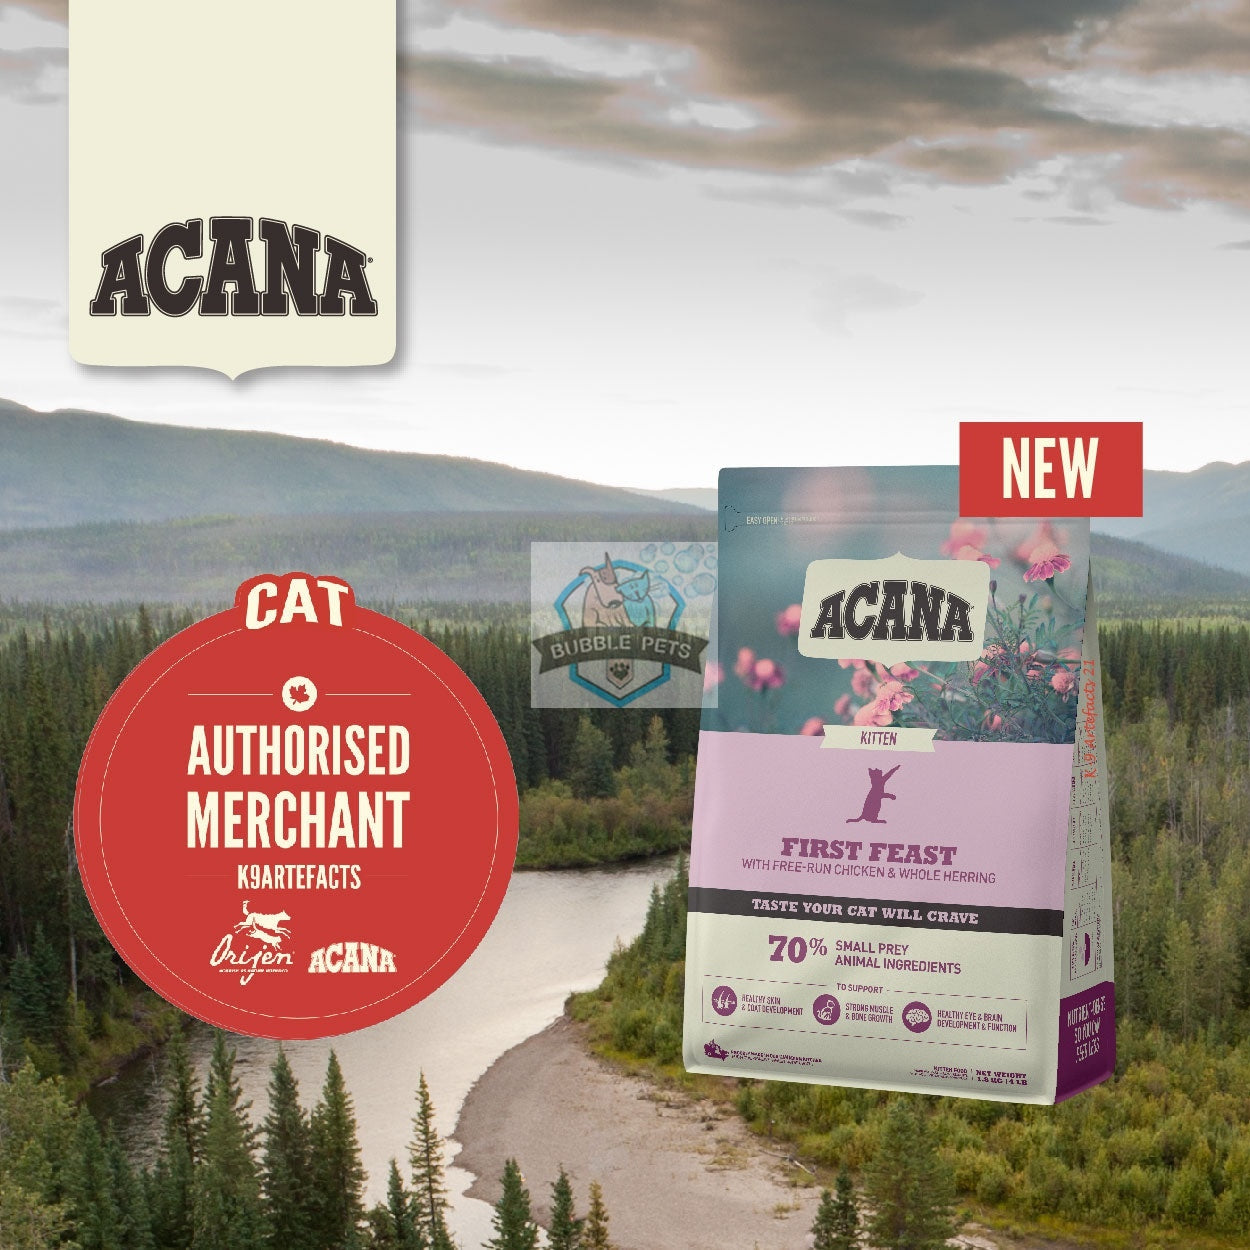 PROMO Extra 10% OFF Acana Freeze Dried Coated First Feast Kitten Cat Food